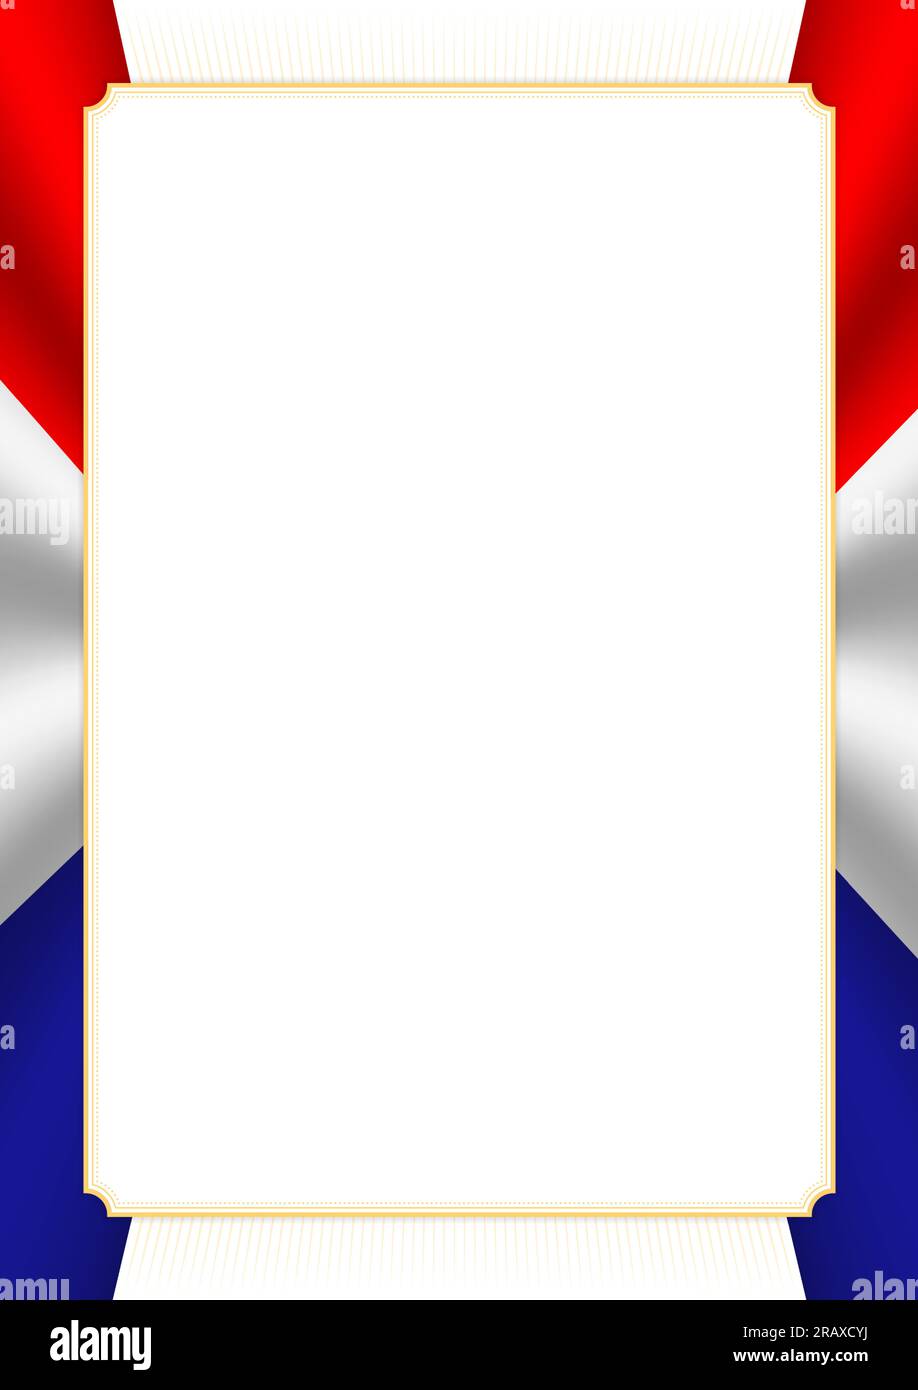 Vertical frame and border with colors of Croatia flag, template ...